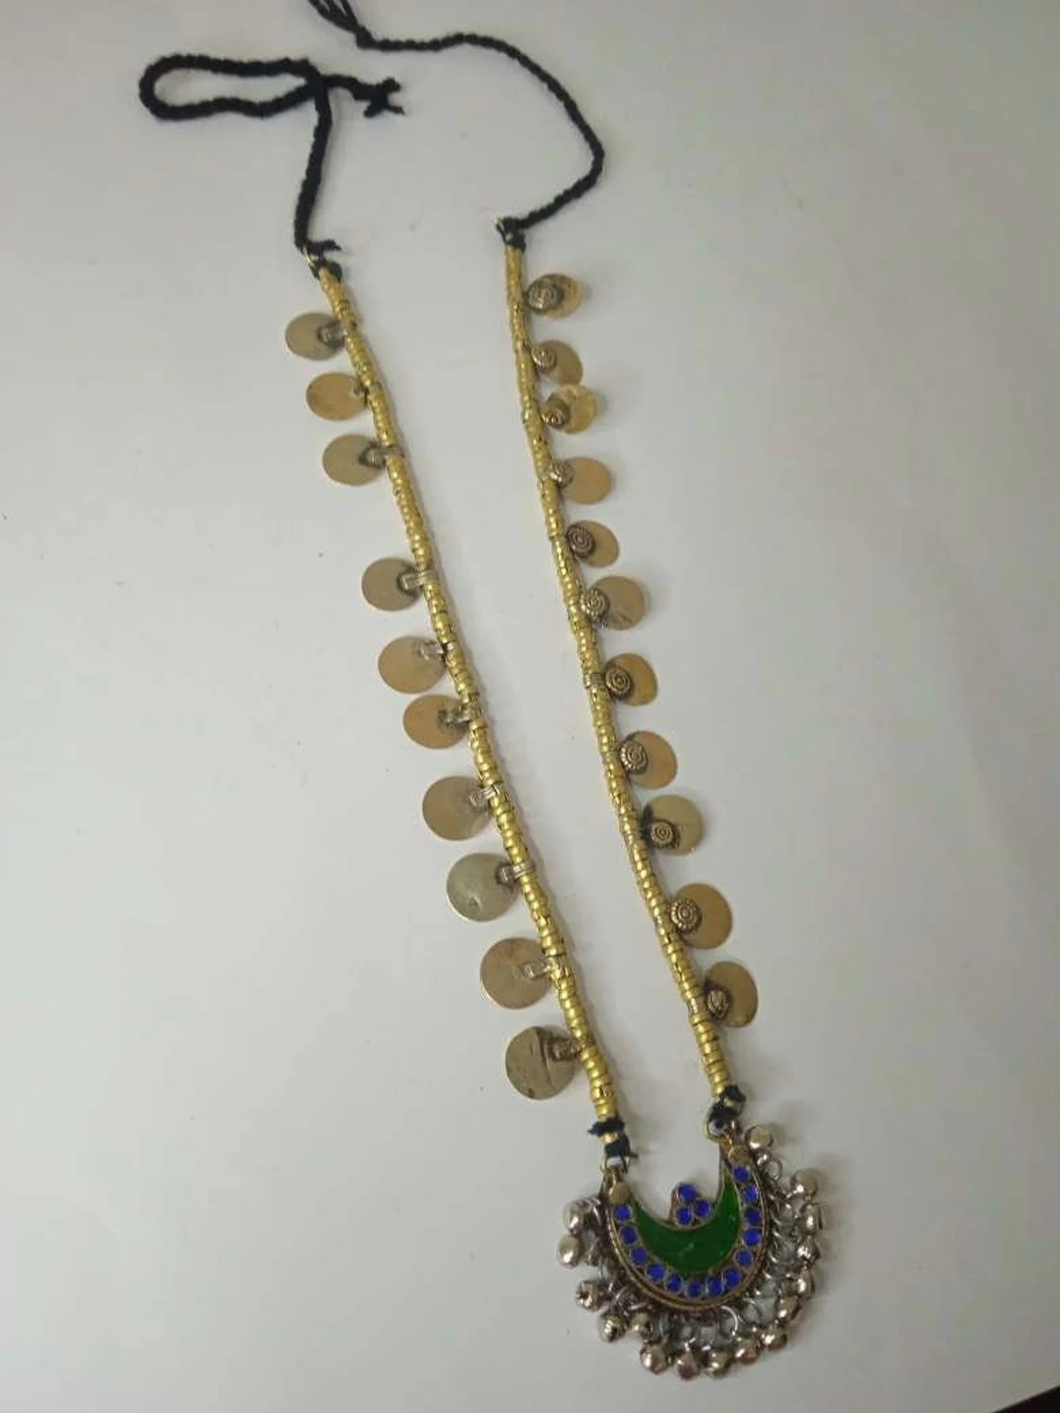 Vintage Afghan Long Mala With Metal And Wooden Beads